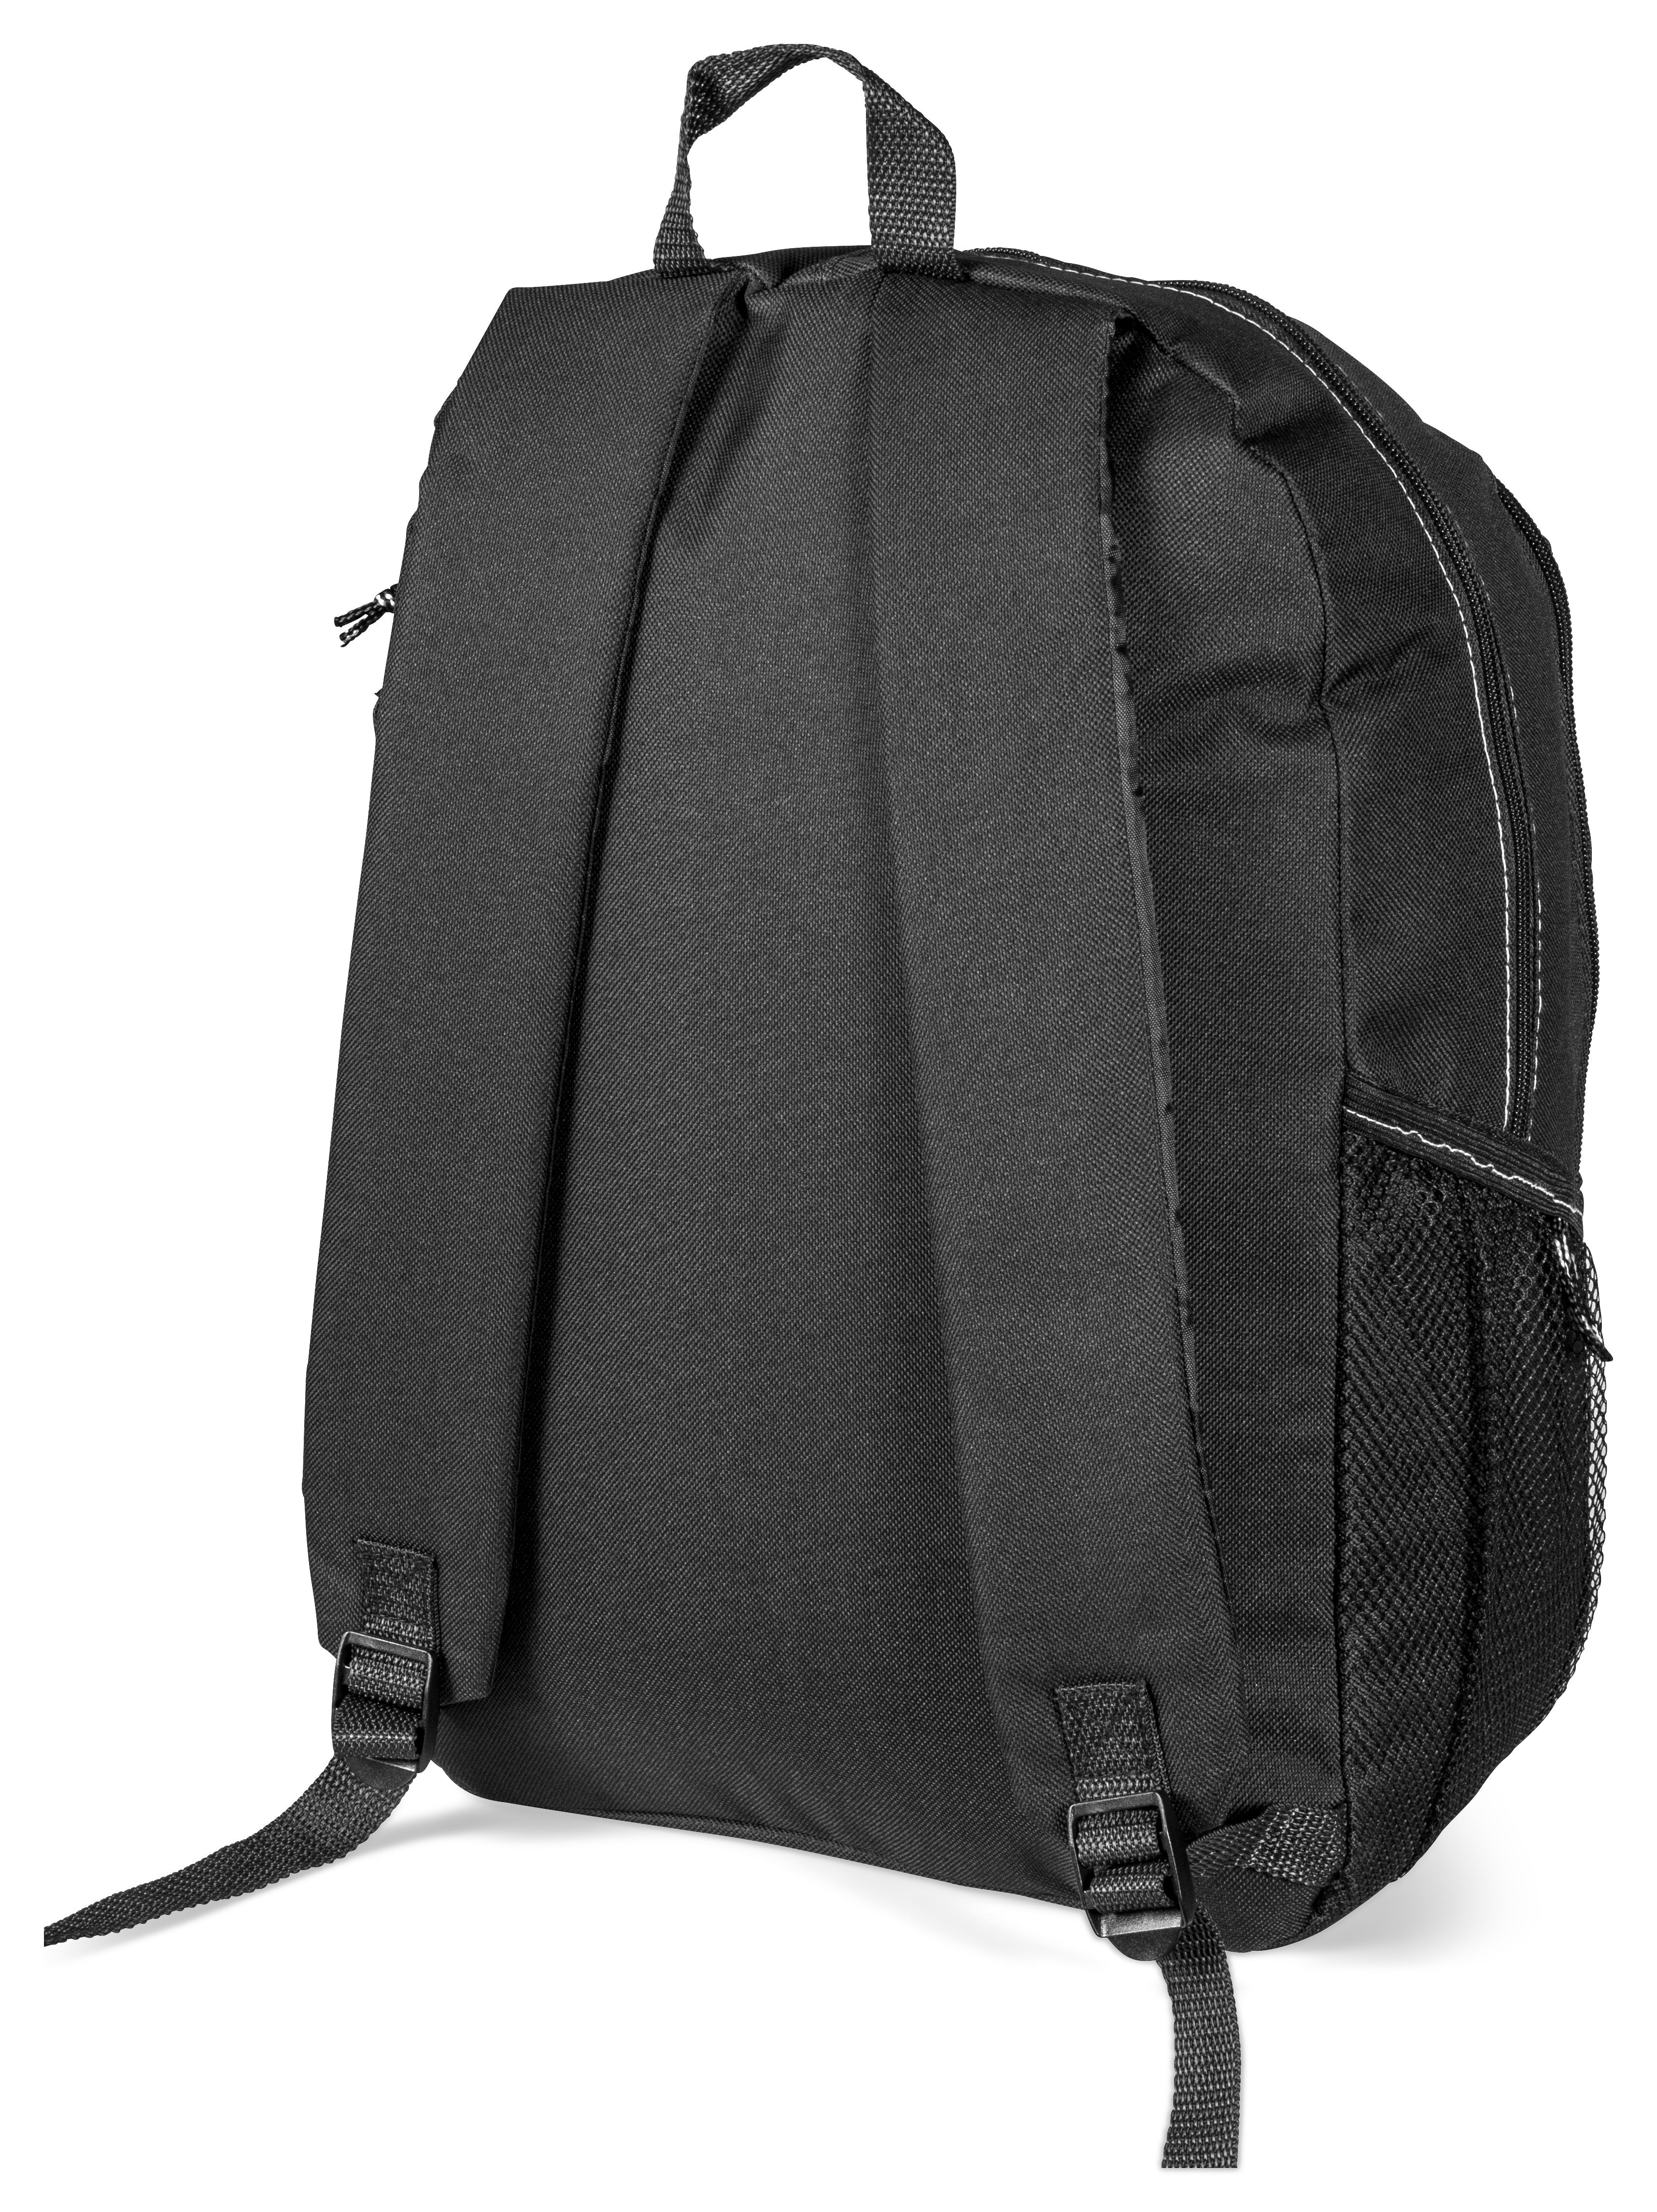 Two-Tone Laptop Backpack